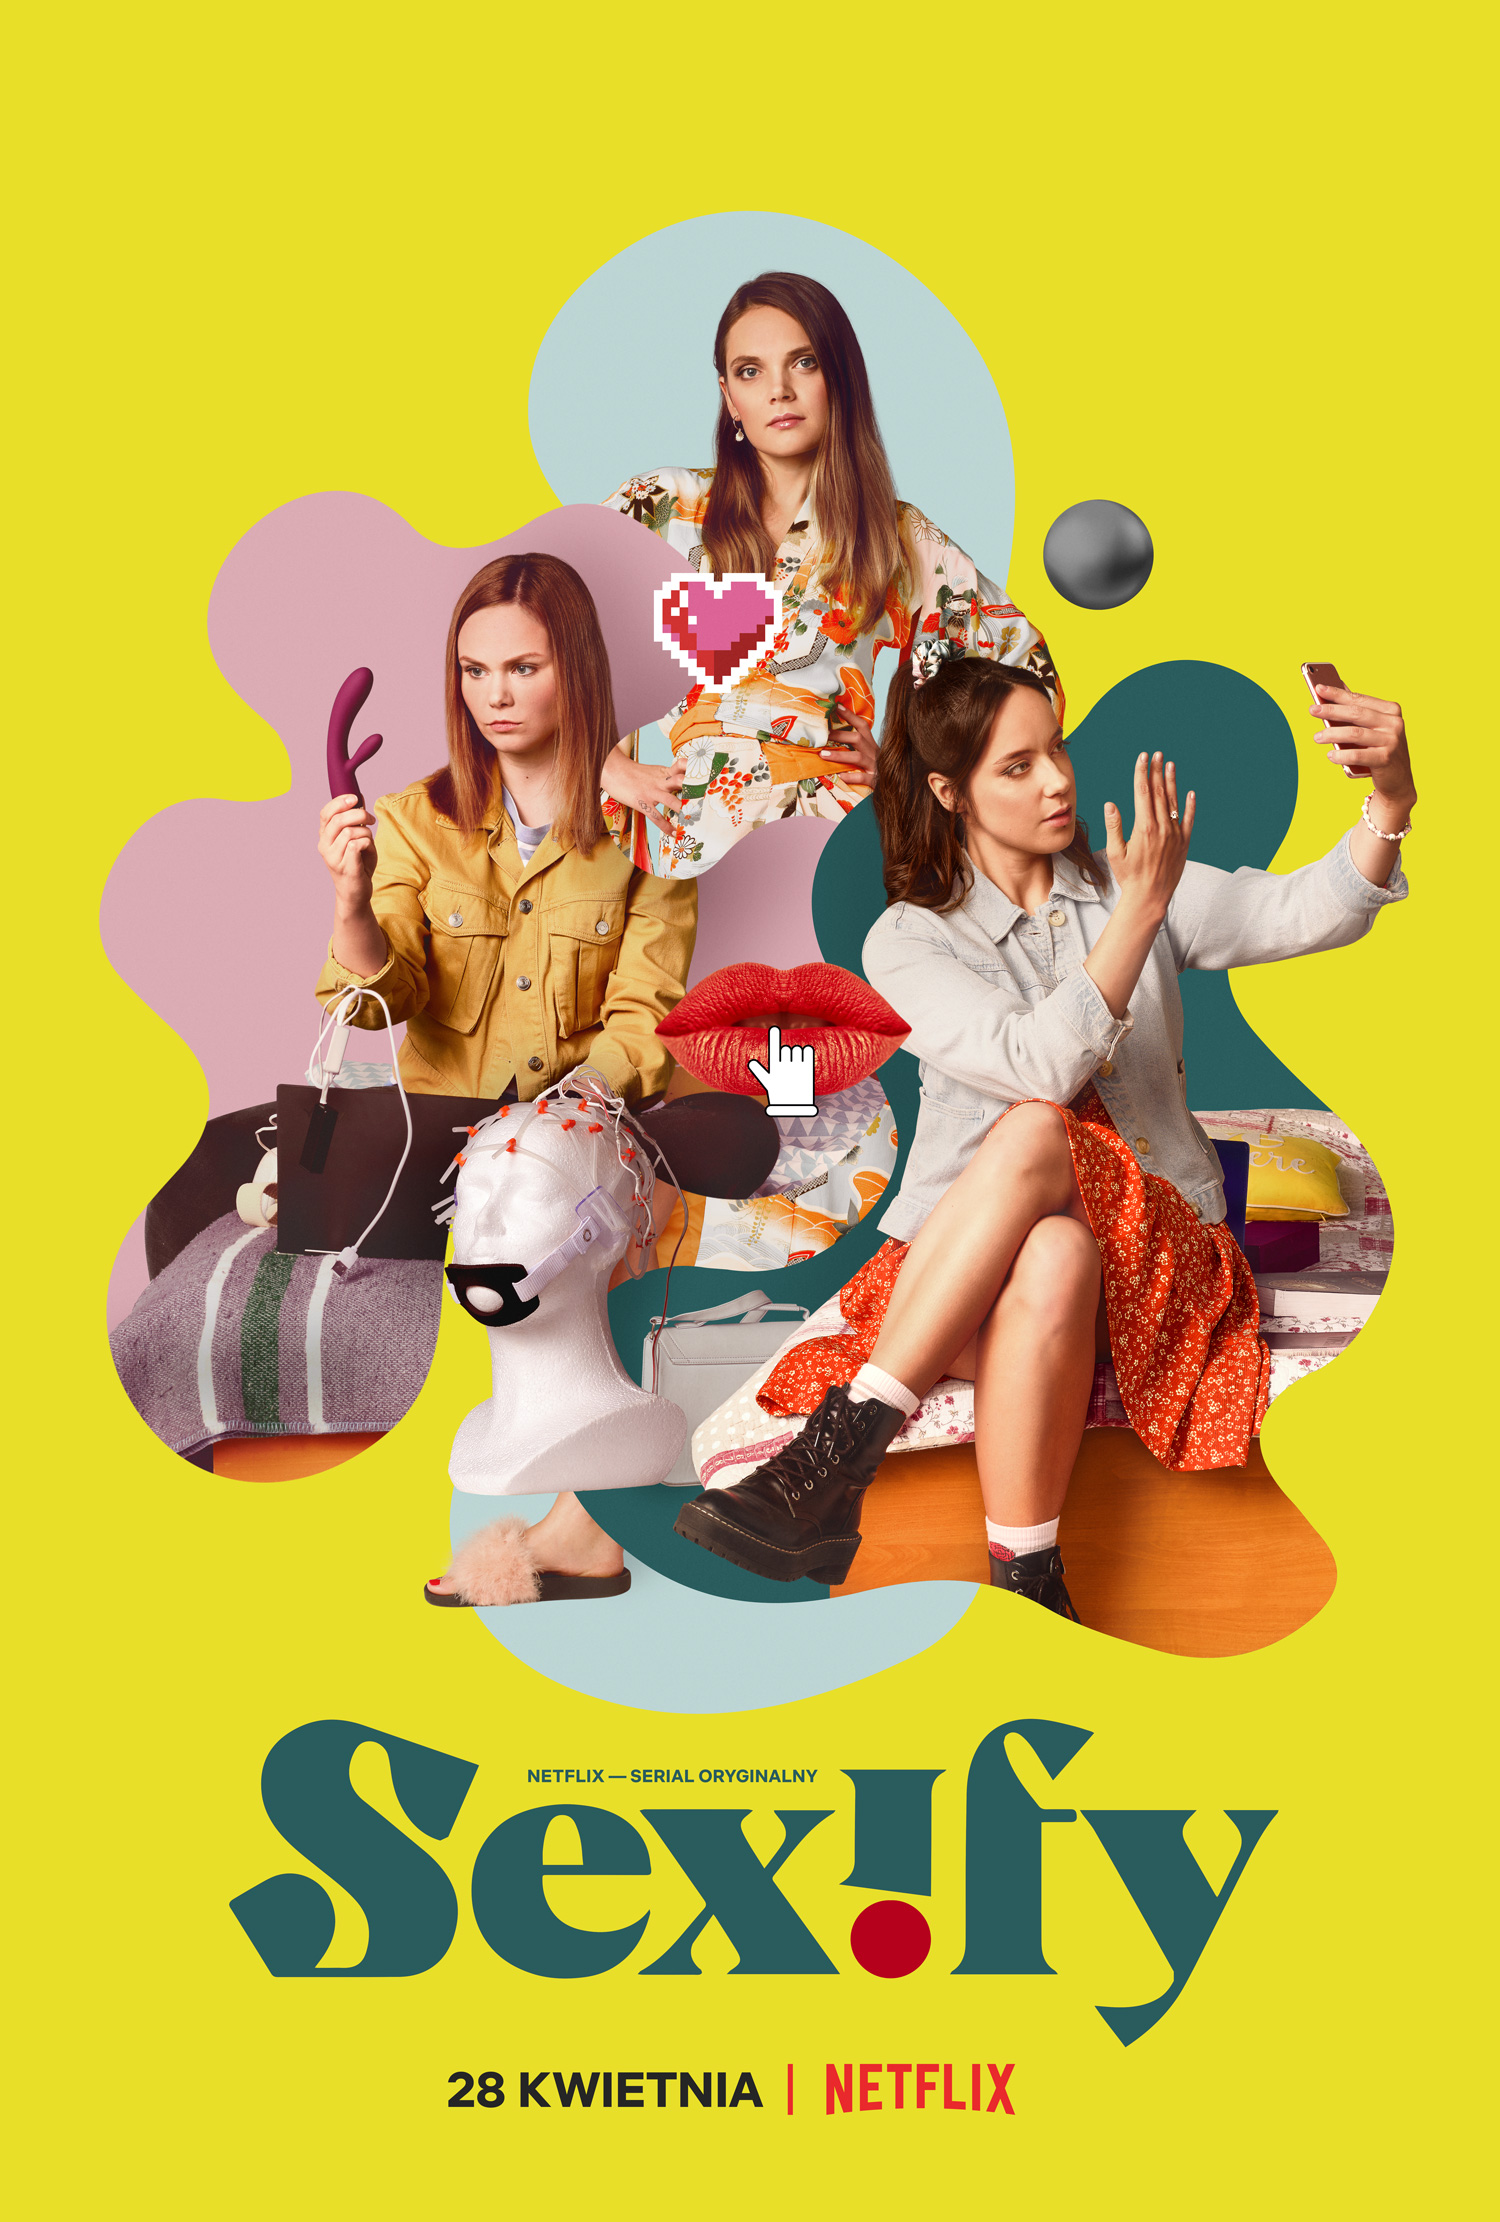 Official poster for Sexify.